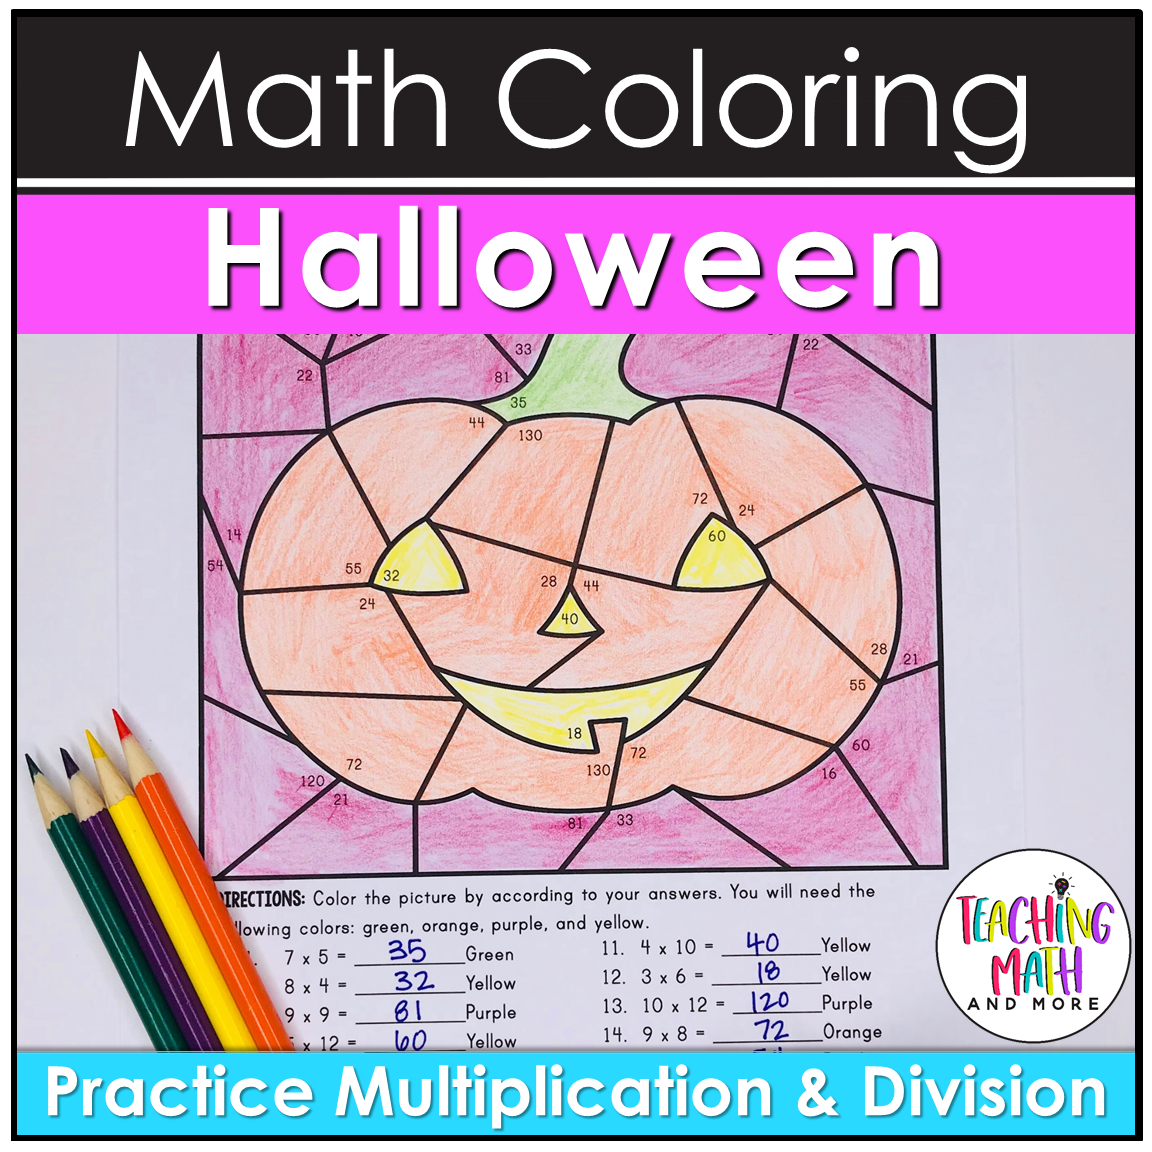 coloring-multiplication-sheets